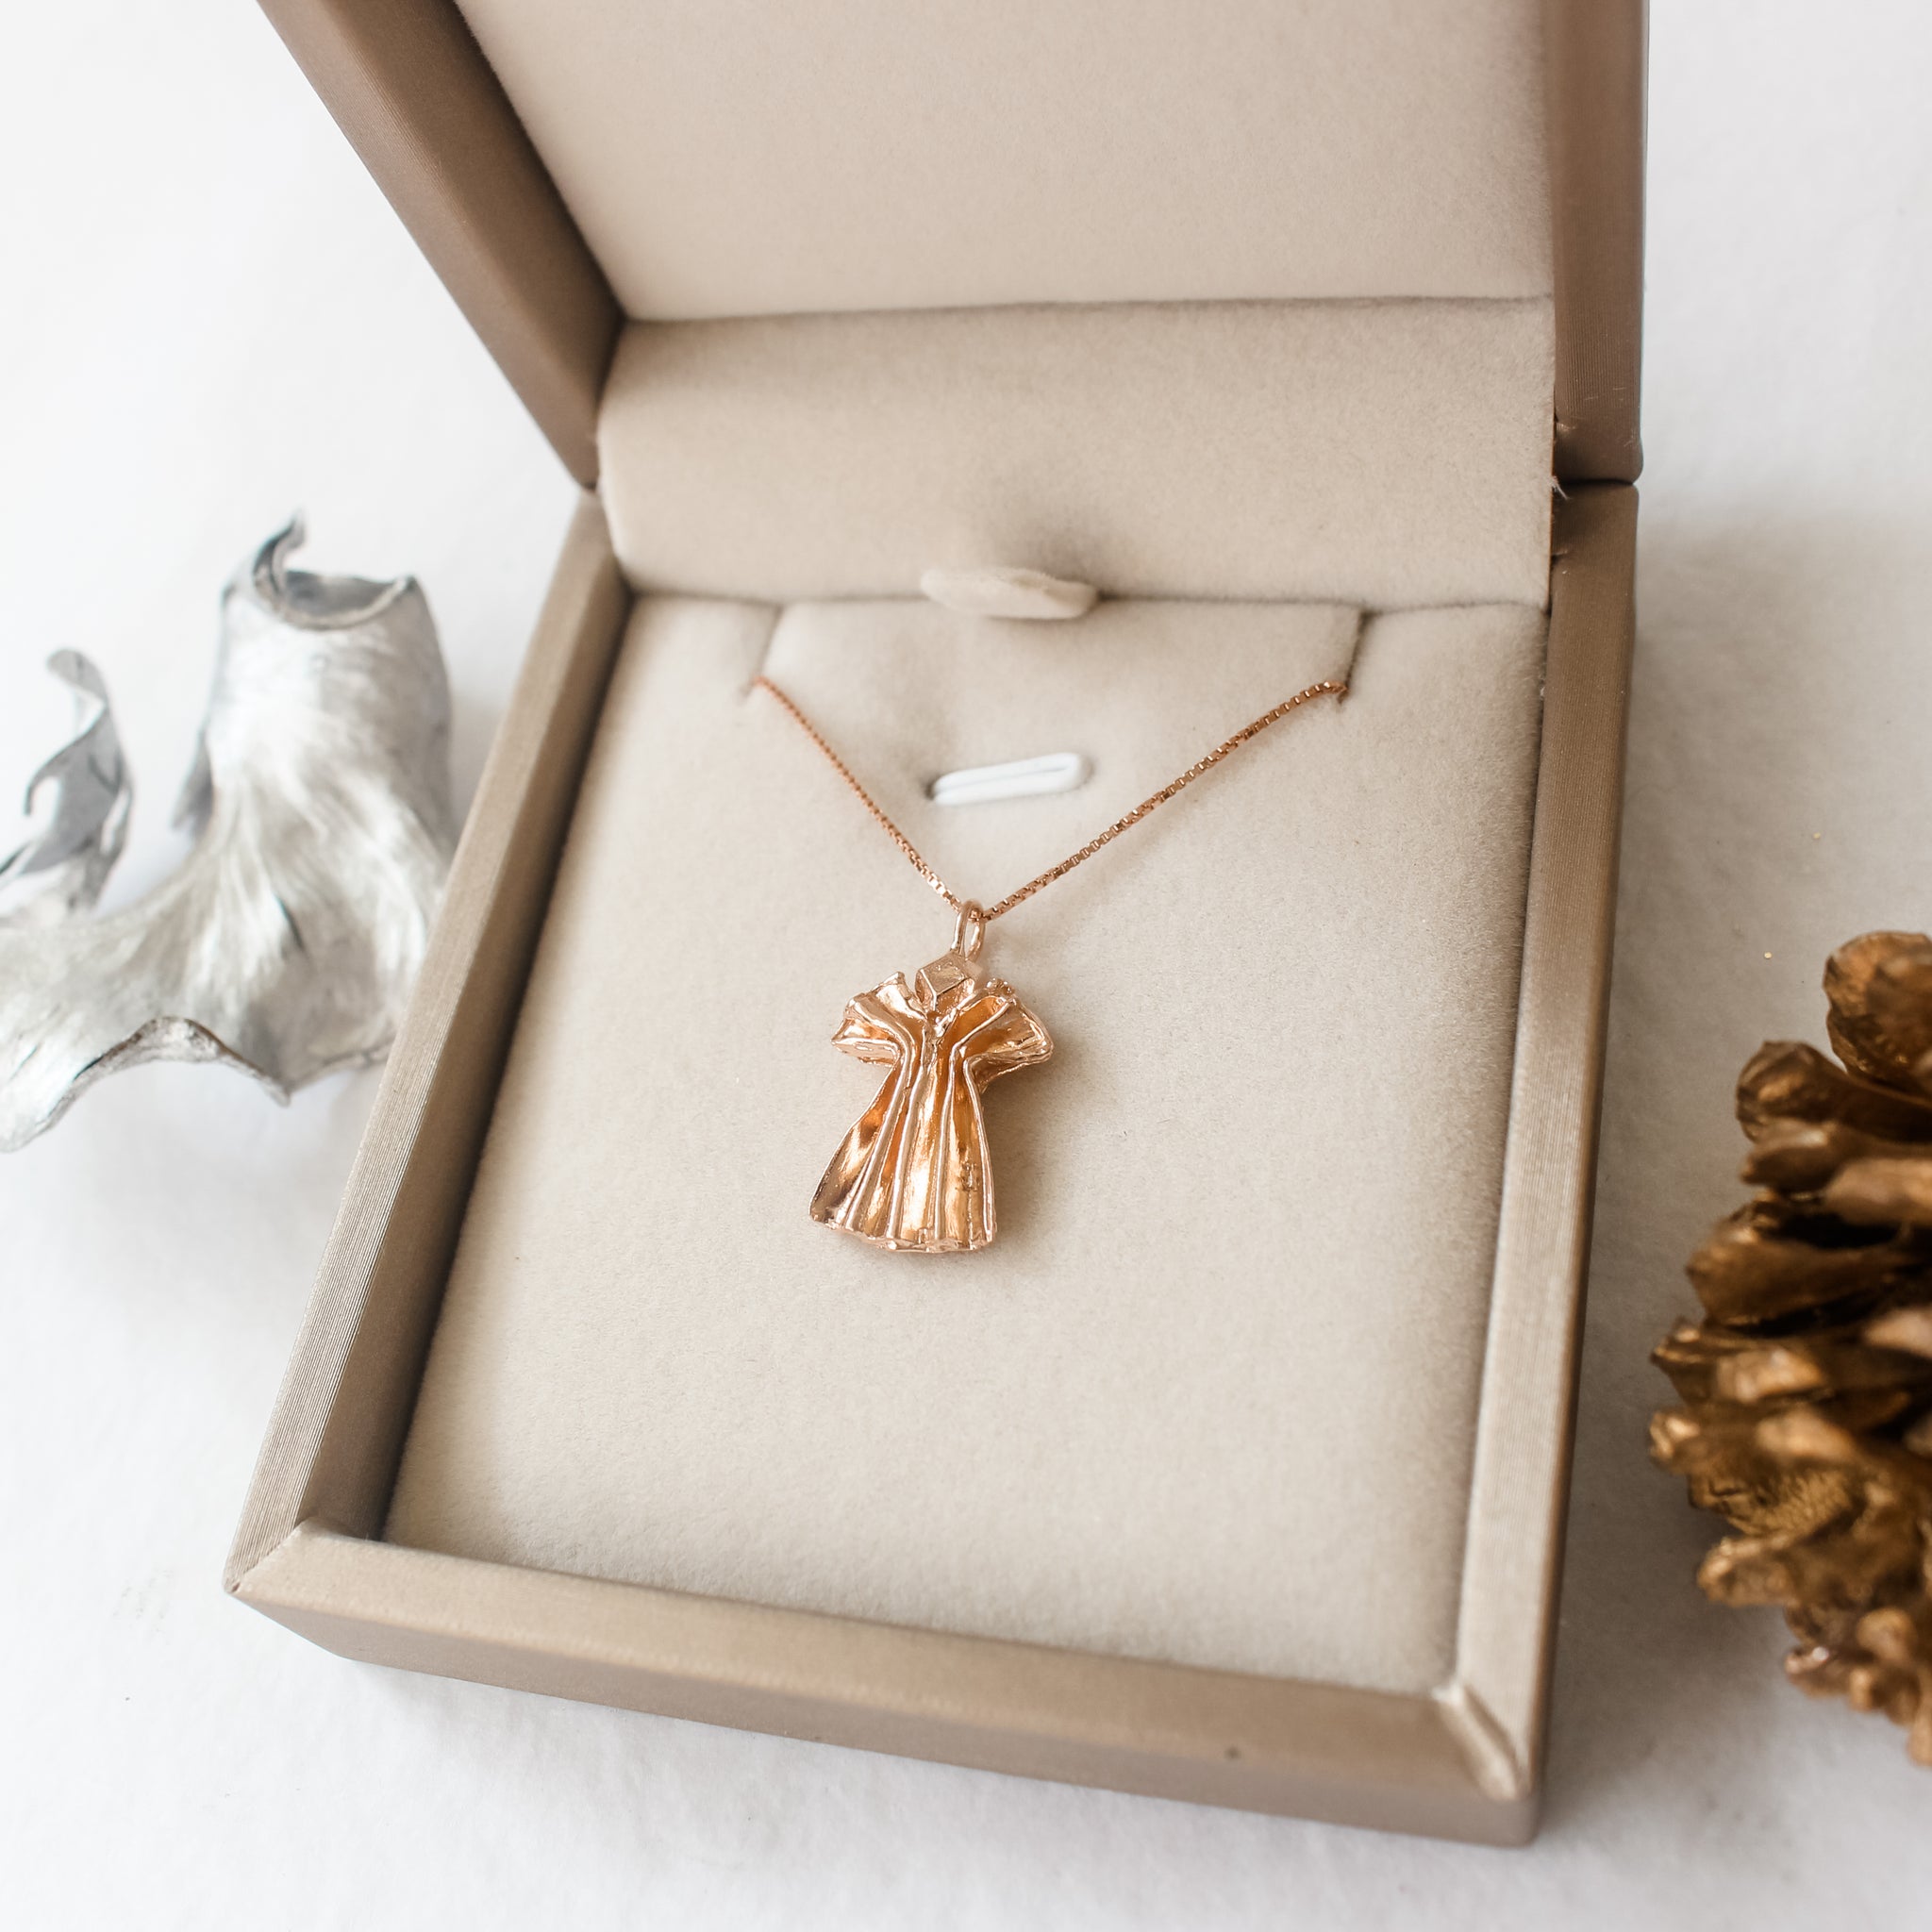 925 Silver Origami Angel Necklace